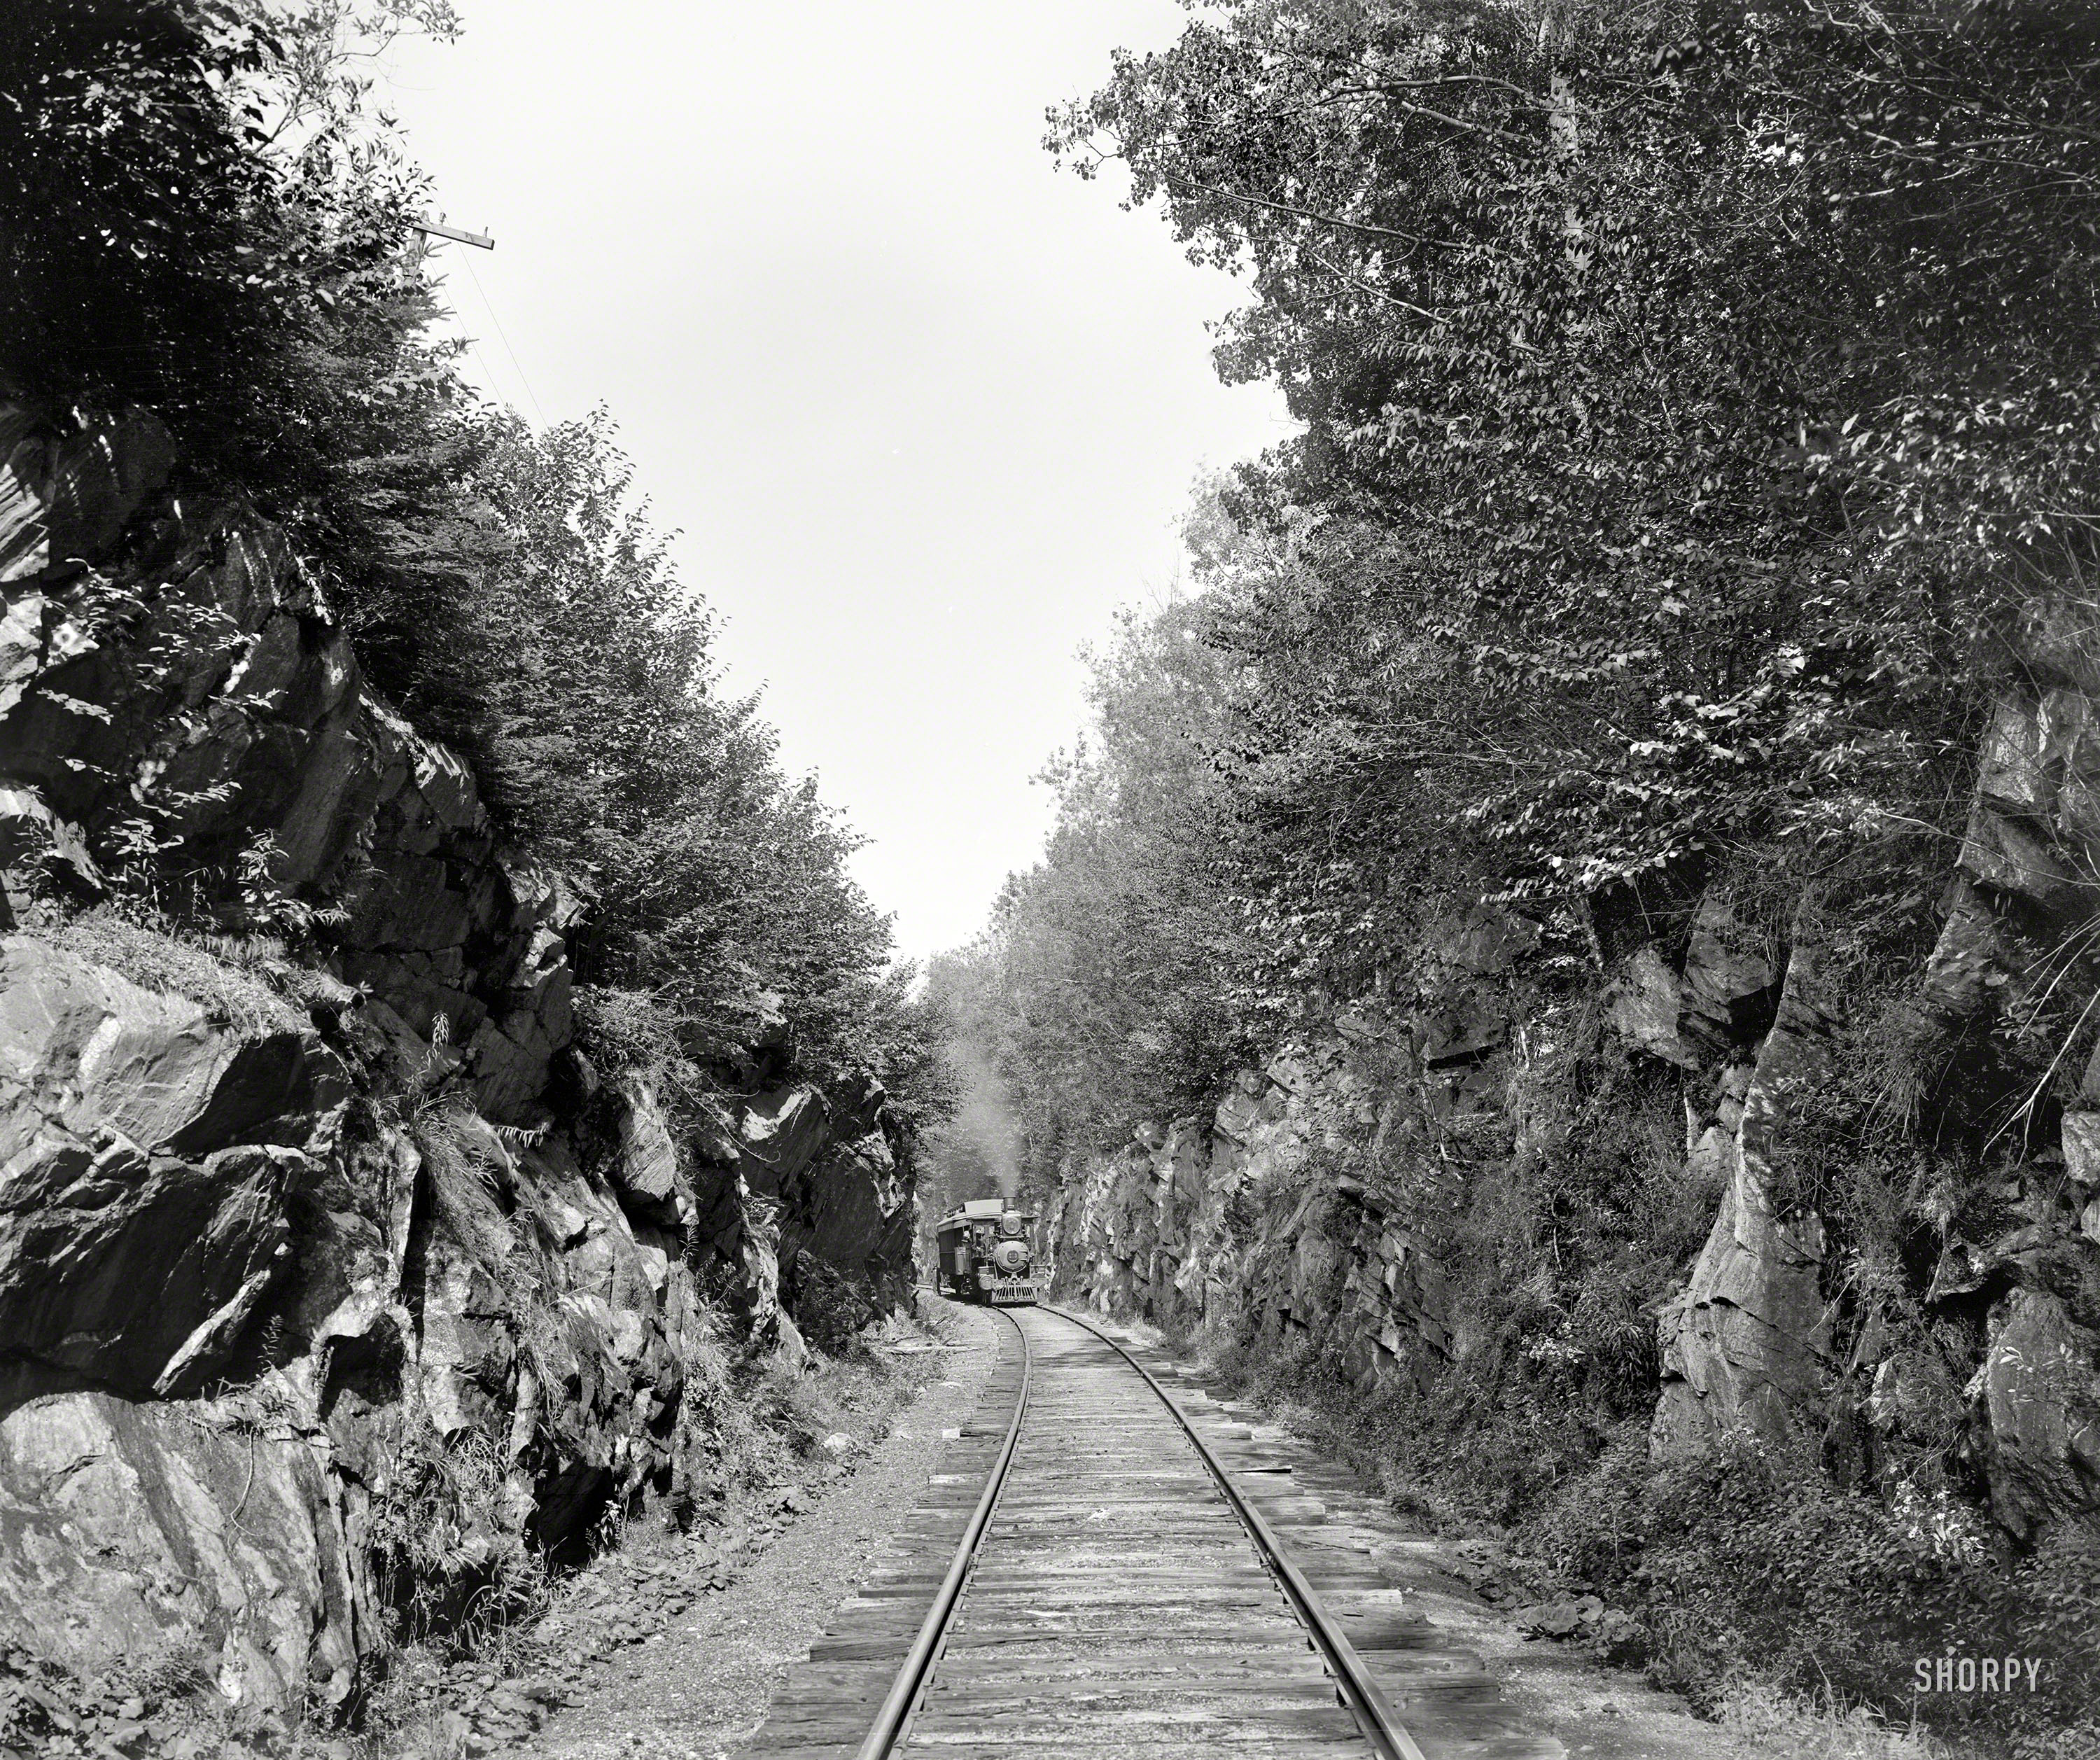 Vermont circa 1904. "Summit Cut, Green Mountains. Rutland R.R. Photographers' Special." A long shot of the engine seen here hauling a carload of shutterbugs. 8x10 inch glass negative, Detroit Photographic Company. View full size.